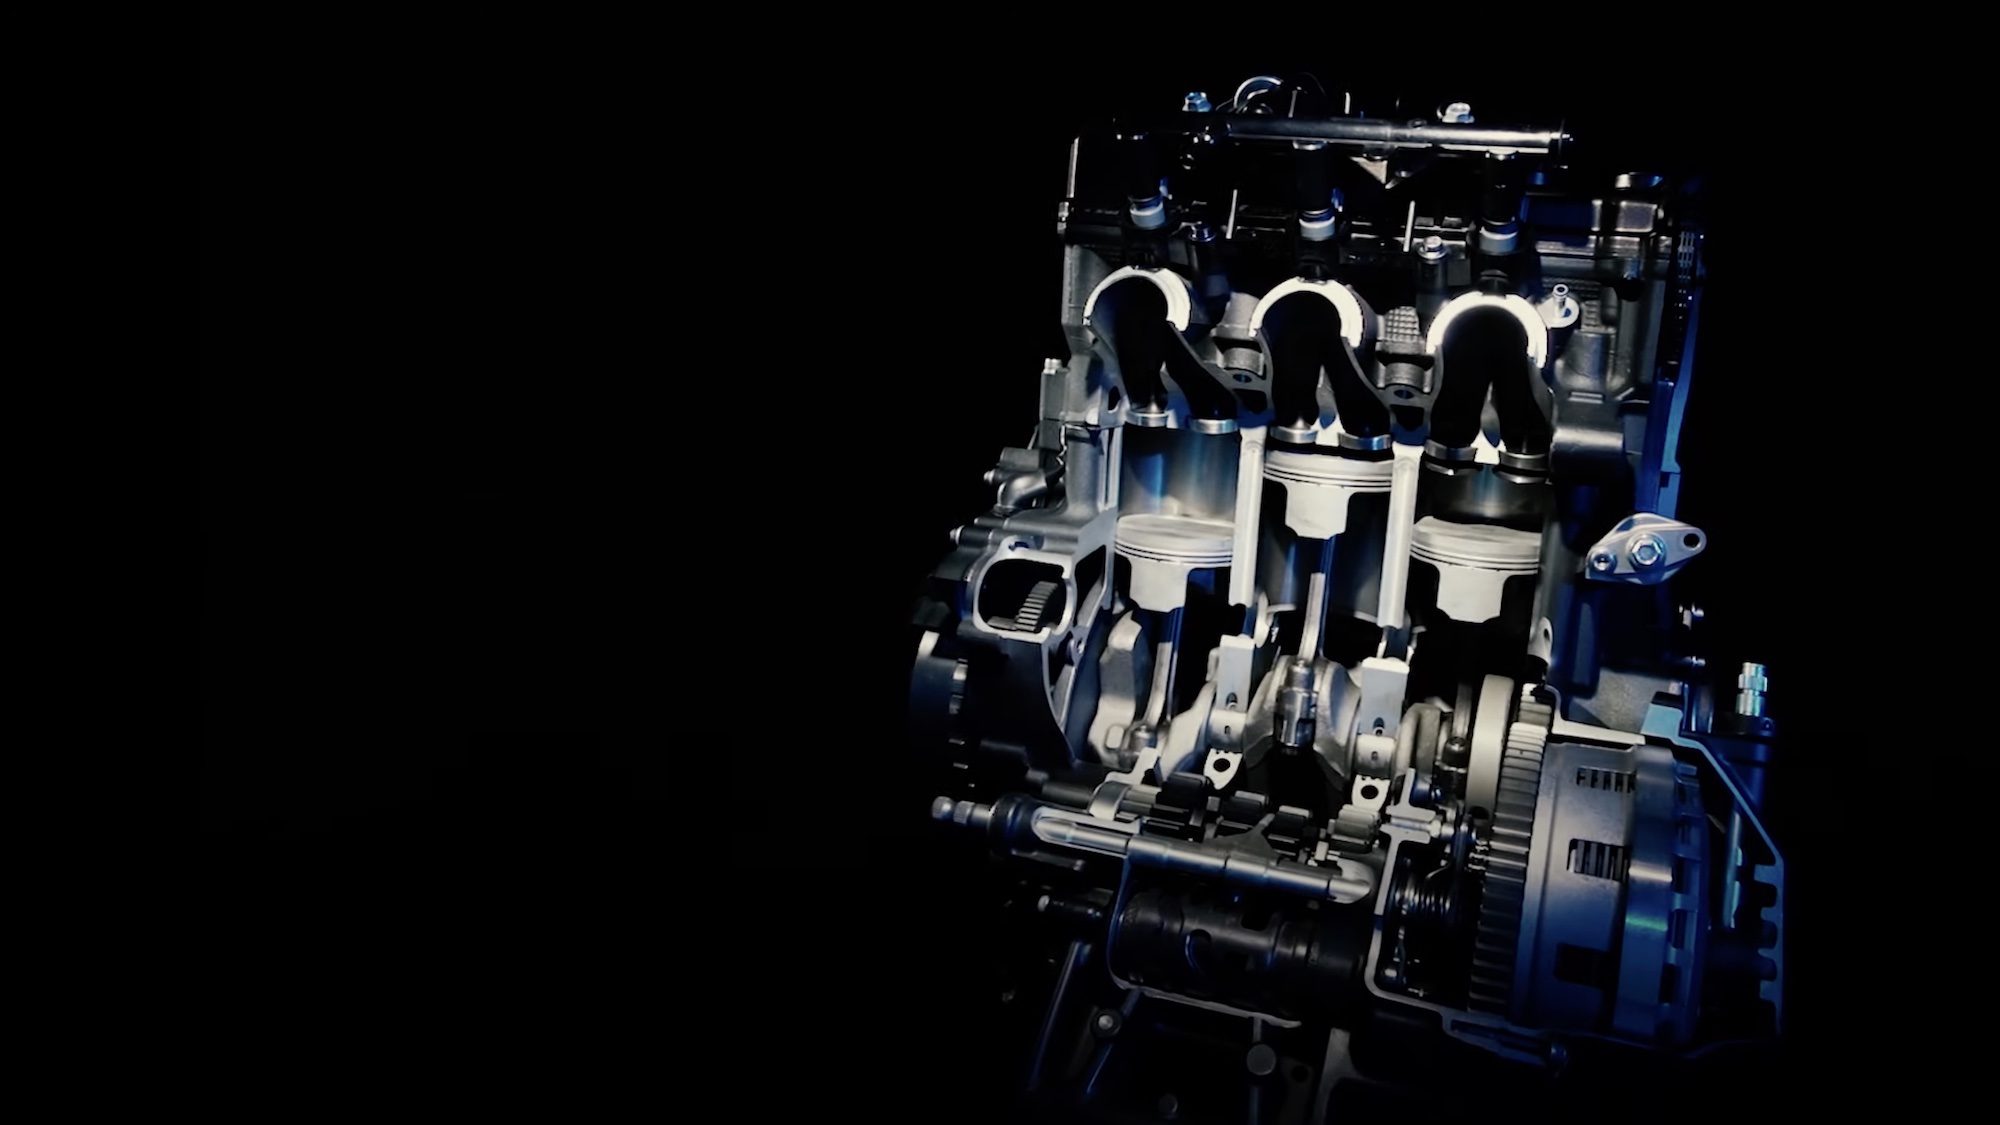 A moody demonstration picture Yamaha's hydrogen engine. Media source from Yamaha.